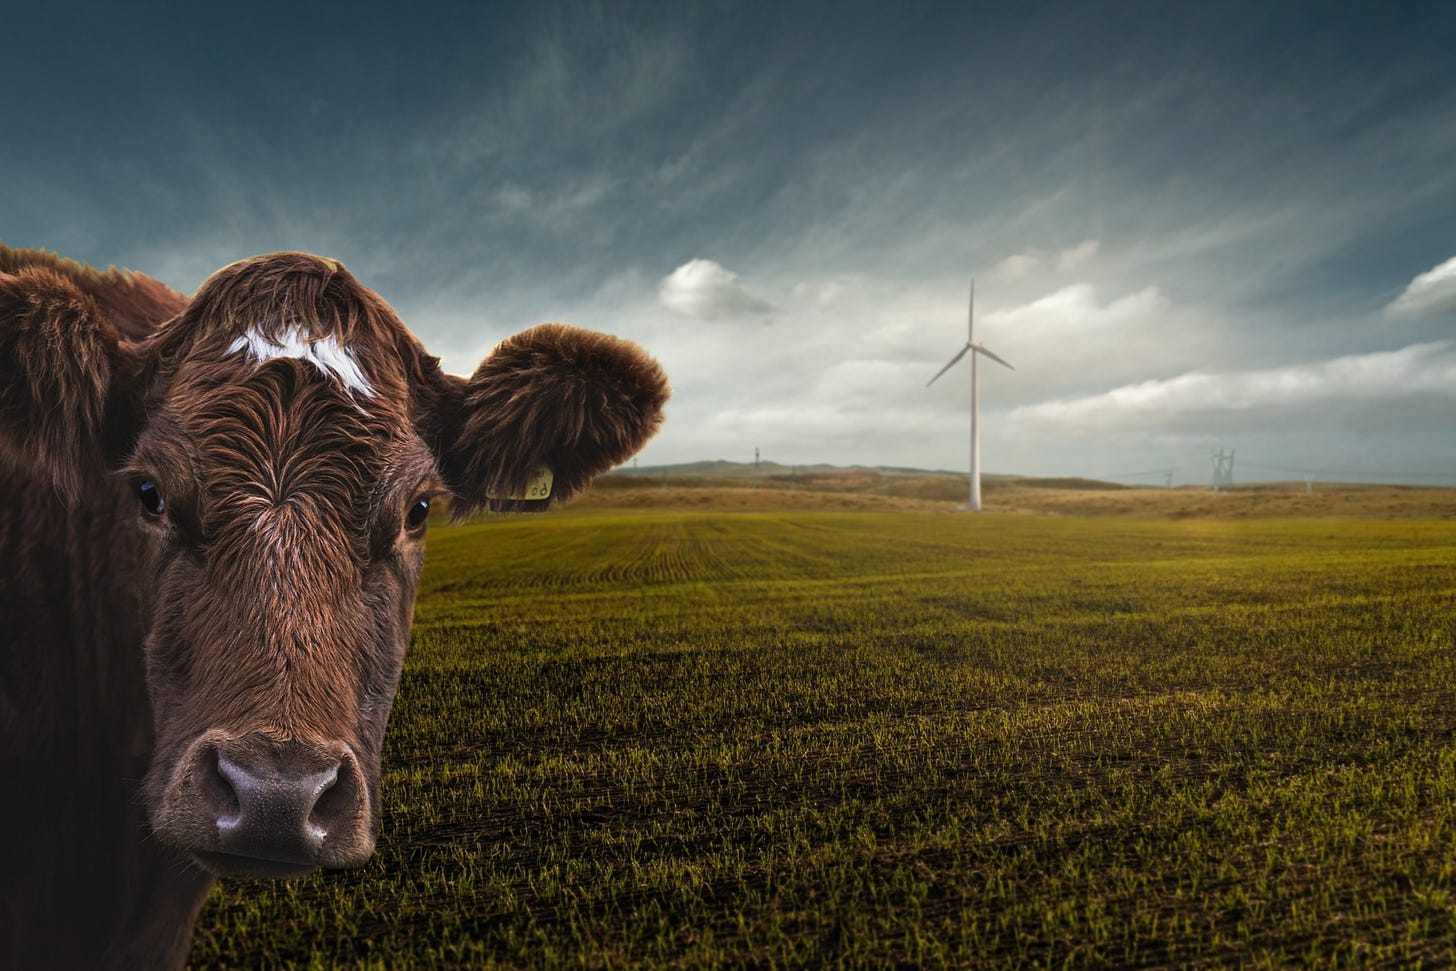 a cow looking toward the camera, on a field with a wind turbine in the background